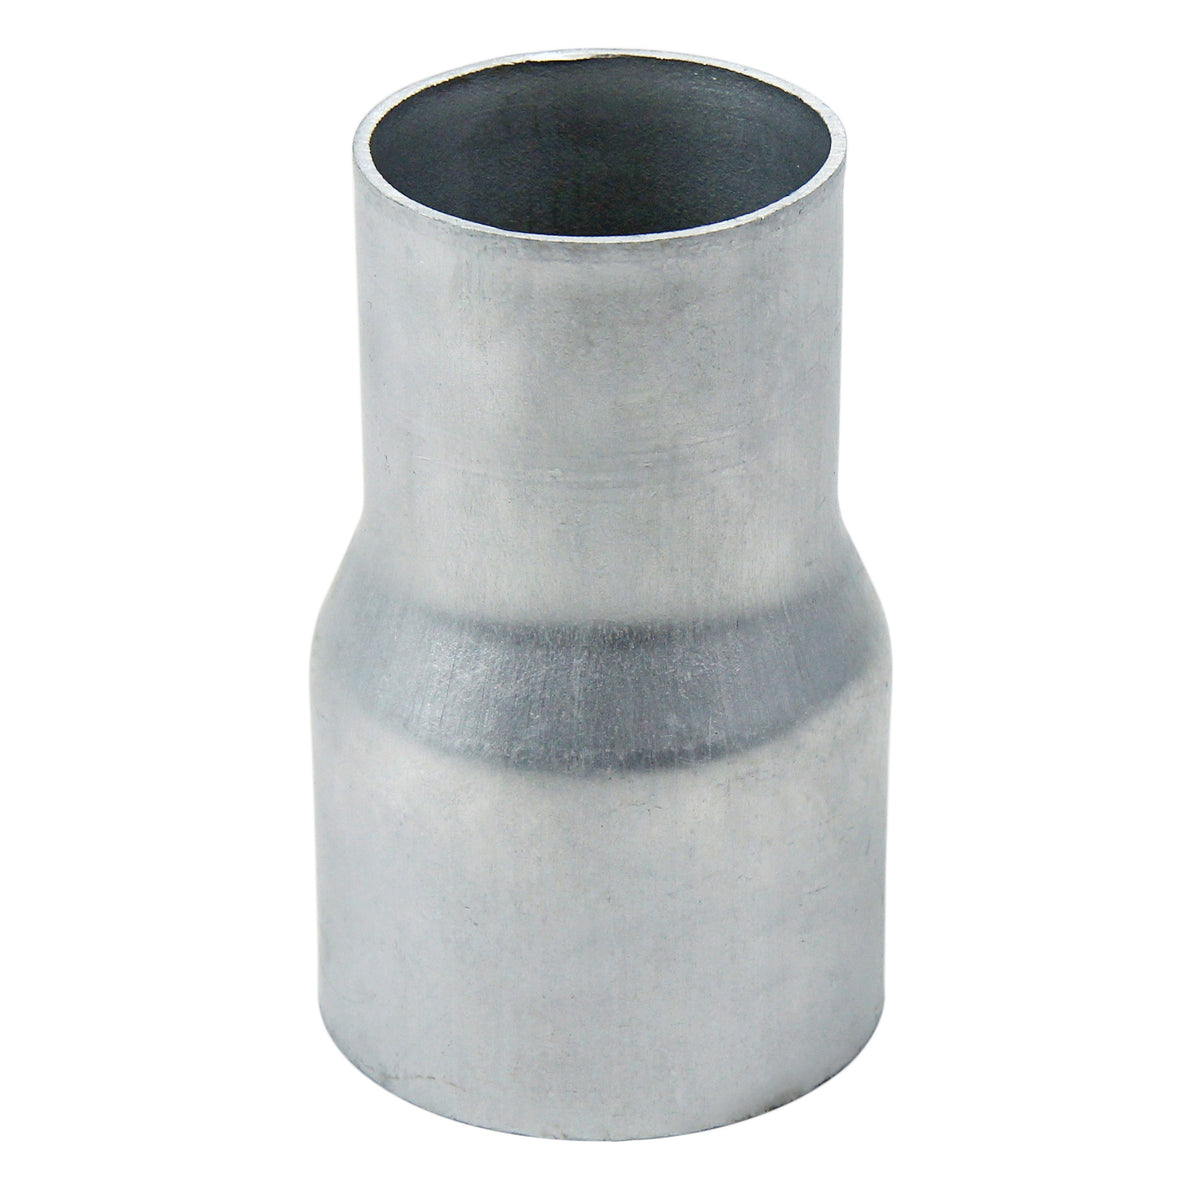 HPS 3.5 inch OD to 3.5 inch ID, 6061 Aluminum Slip Fit Transition Reducer Tube Joiner, 4 inch Long